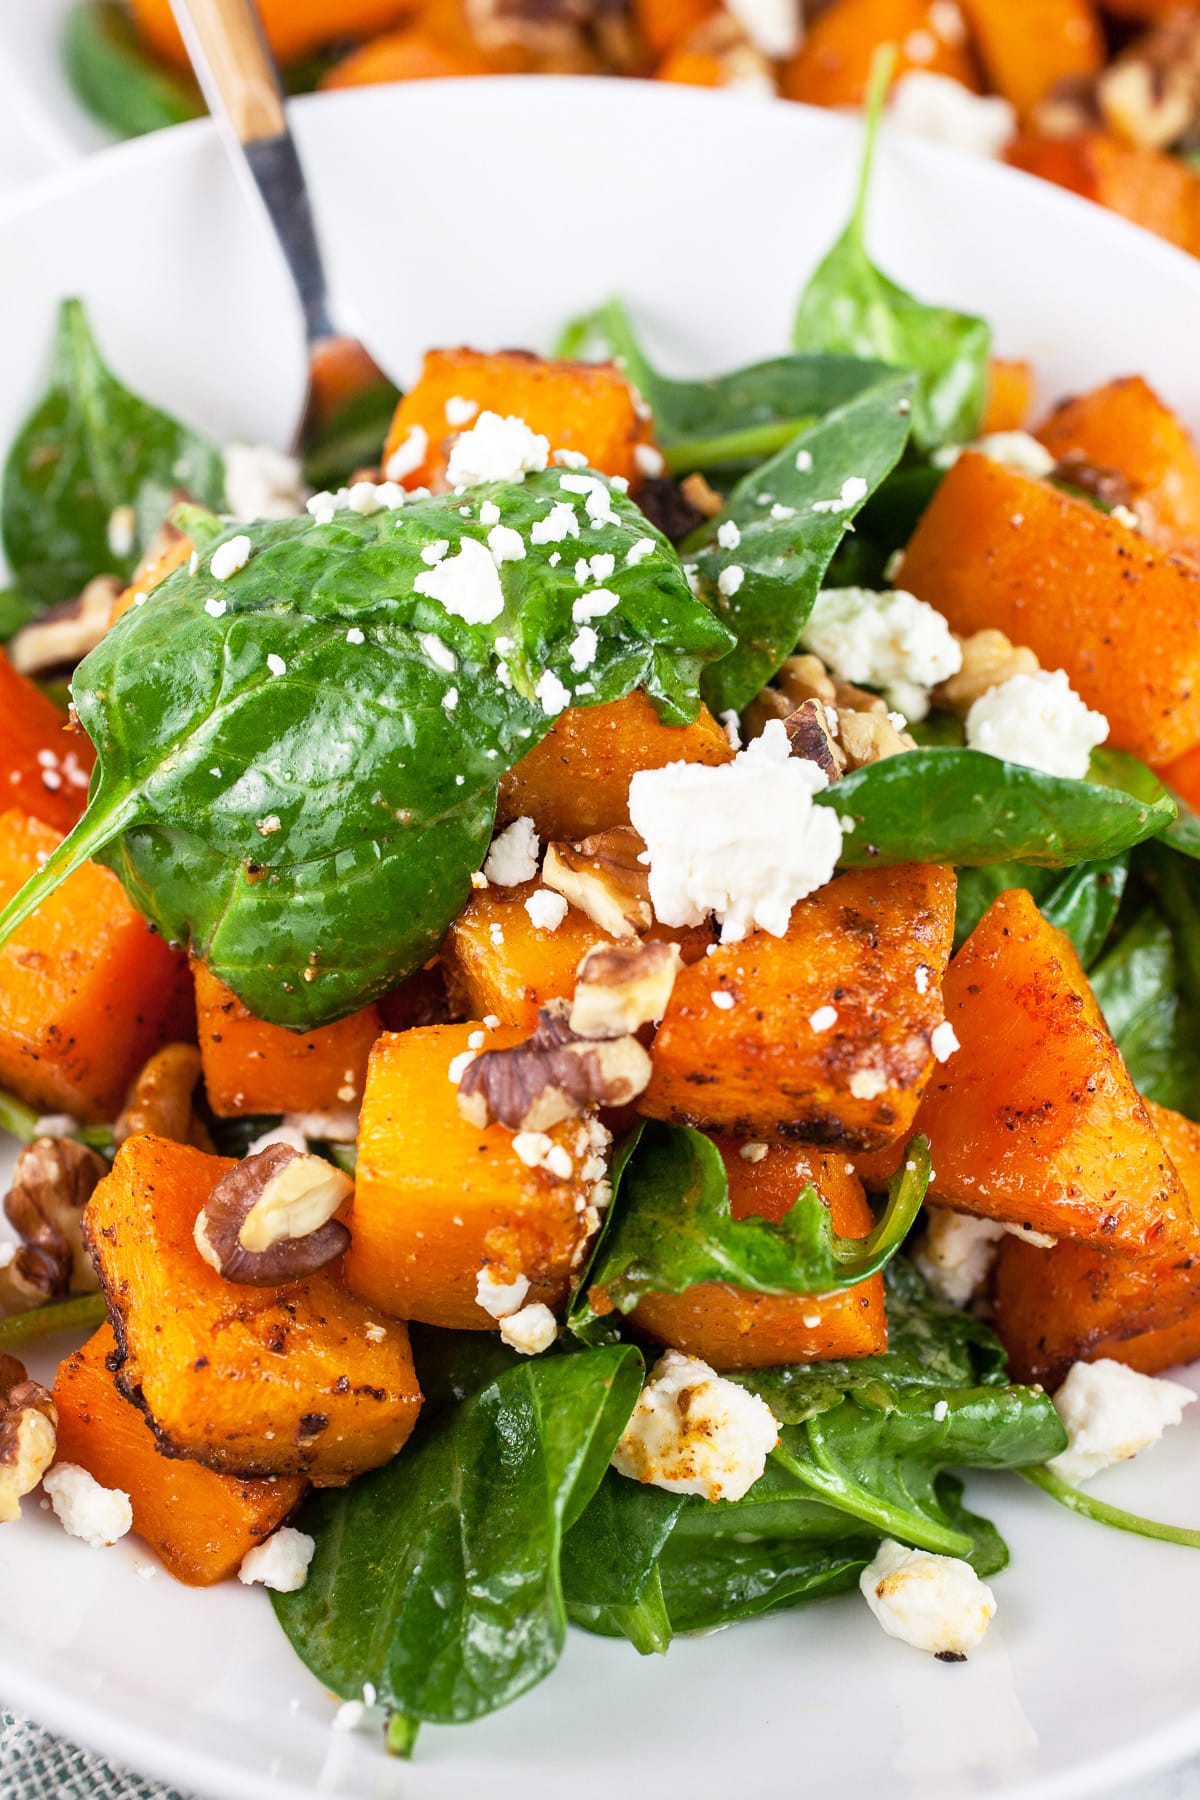 Butternut squash salad with greens, walnuts, and feta in white bowl with fork.